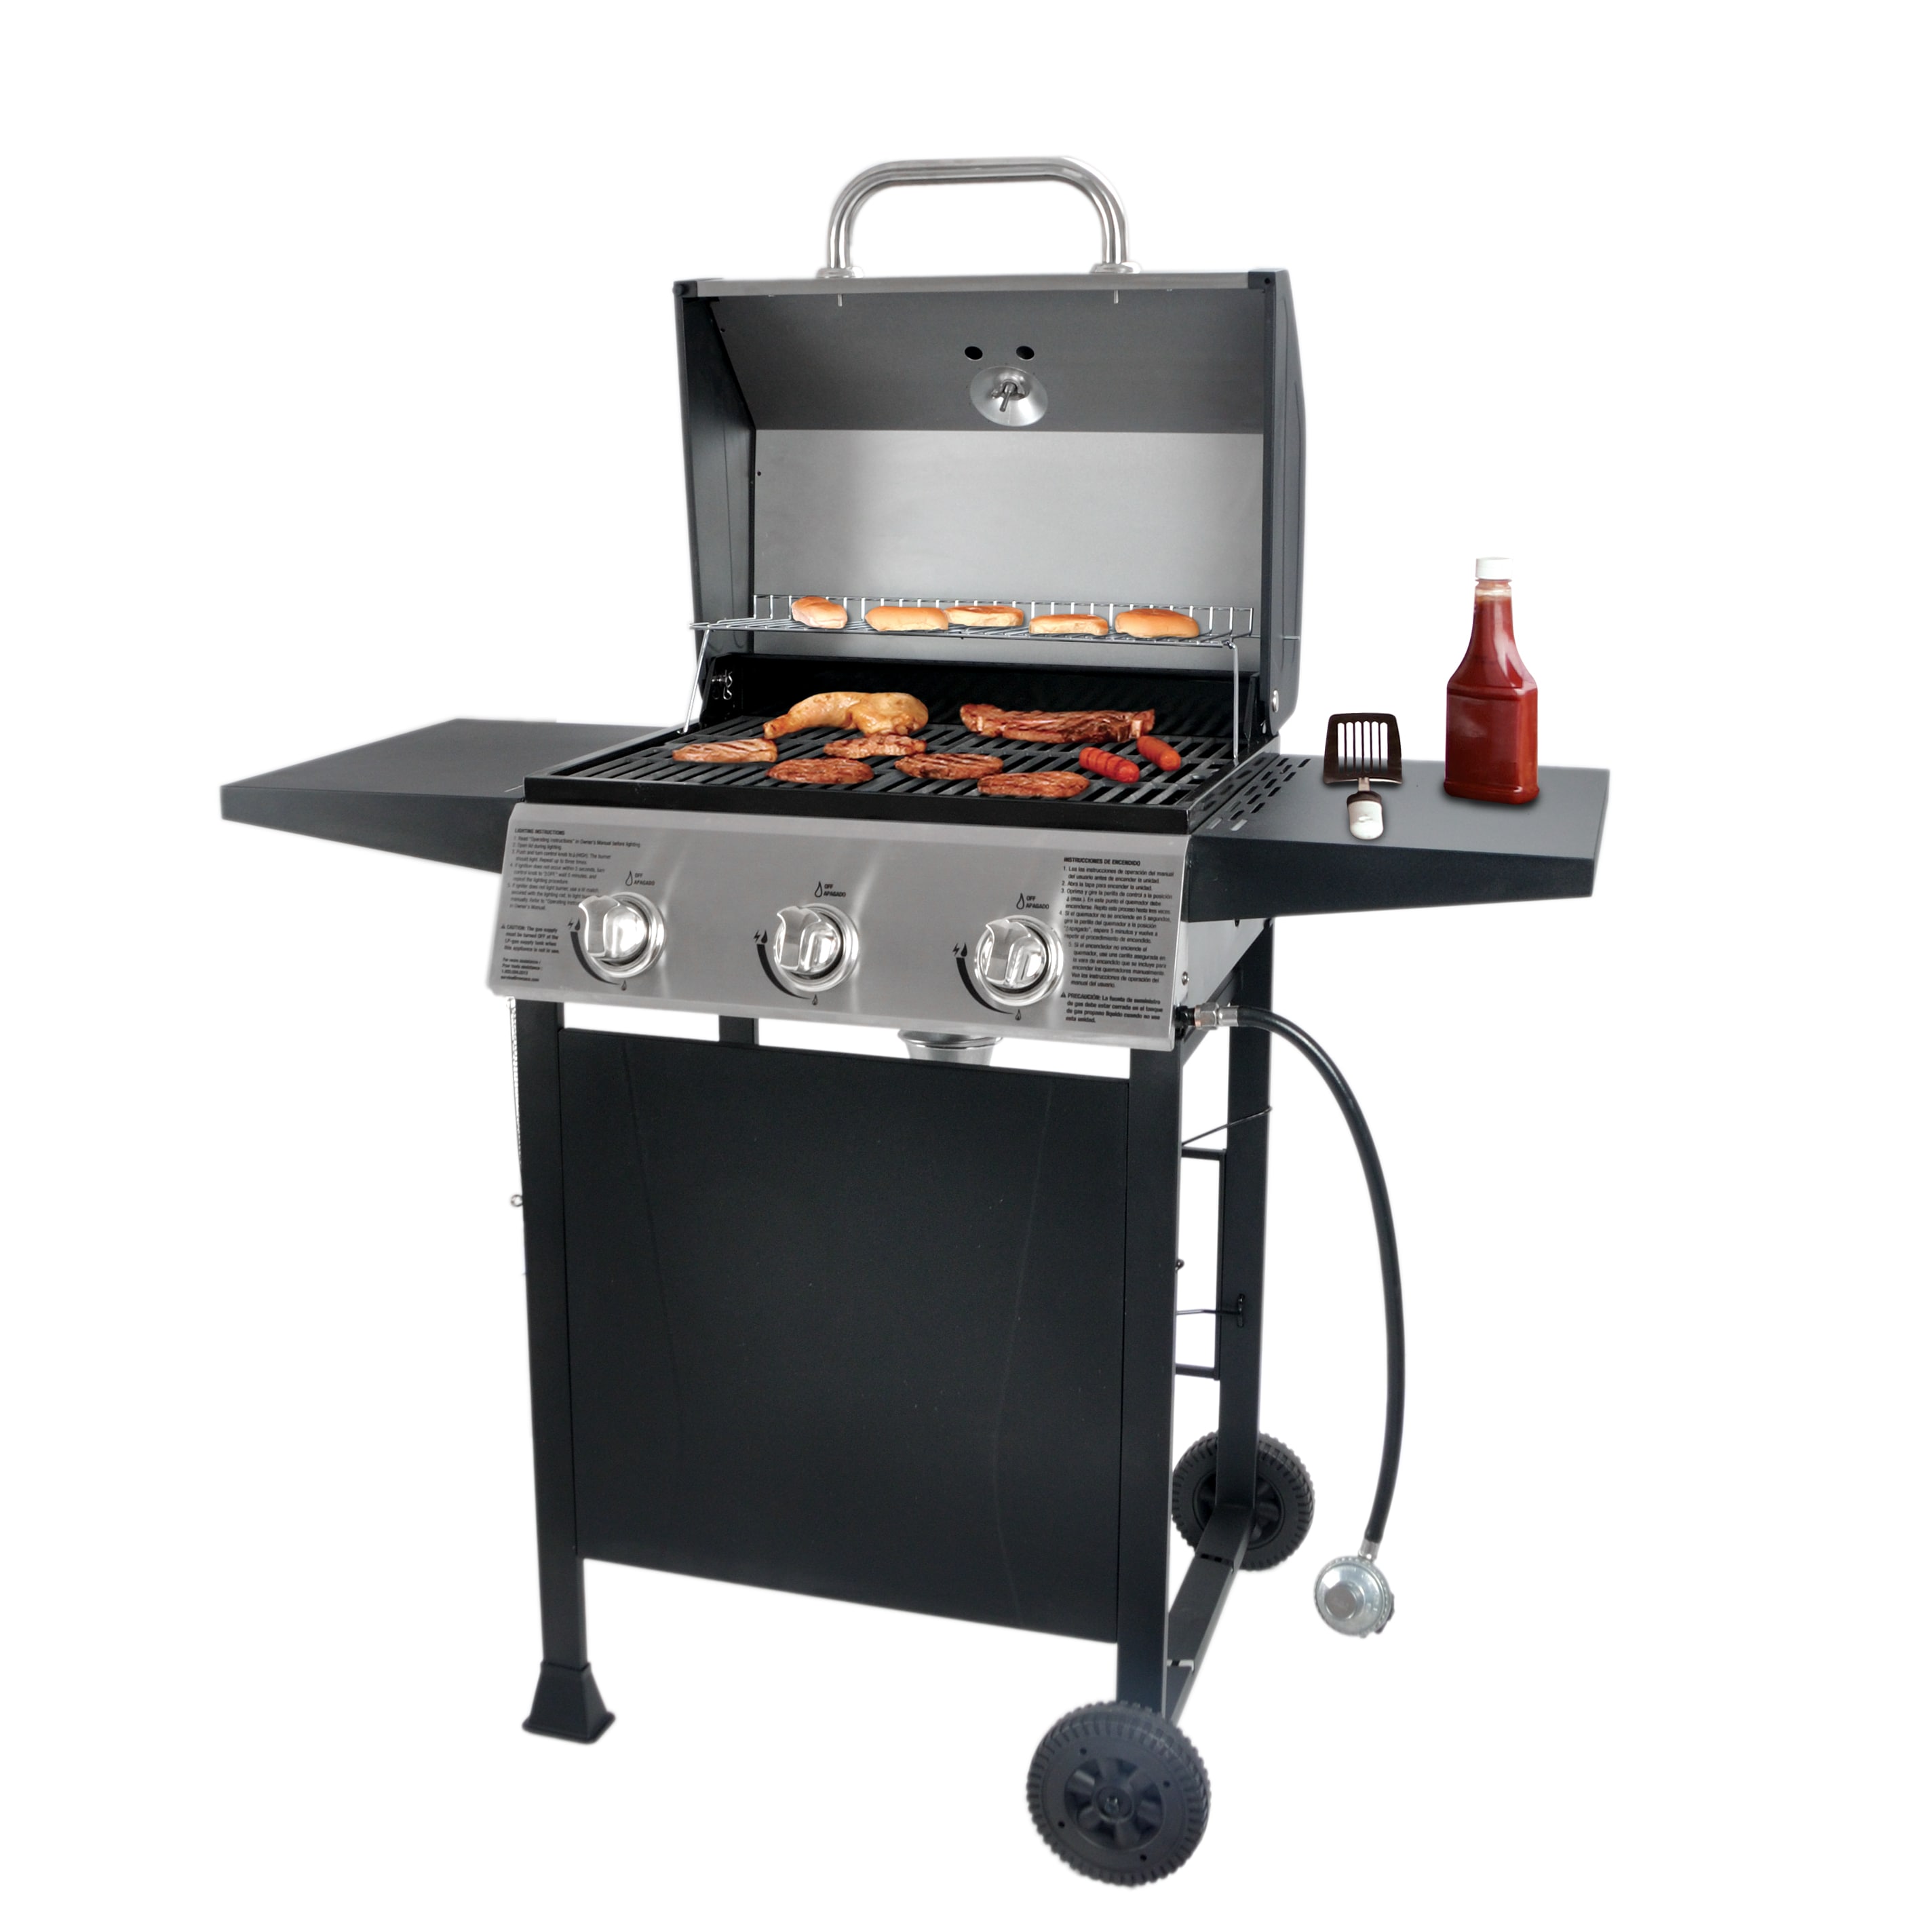 Large Propane Gas Grill 3-Burner with Grill Mats and Accessories Grill Kit  21PC